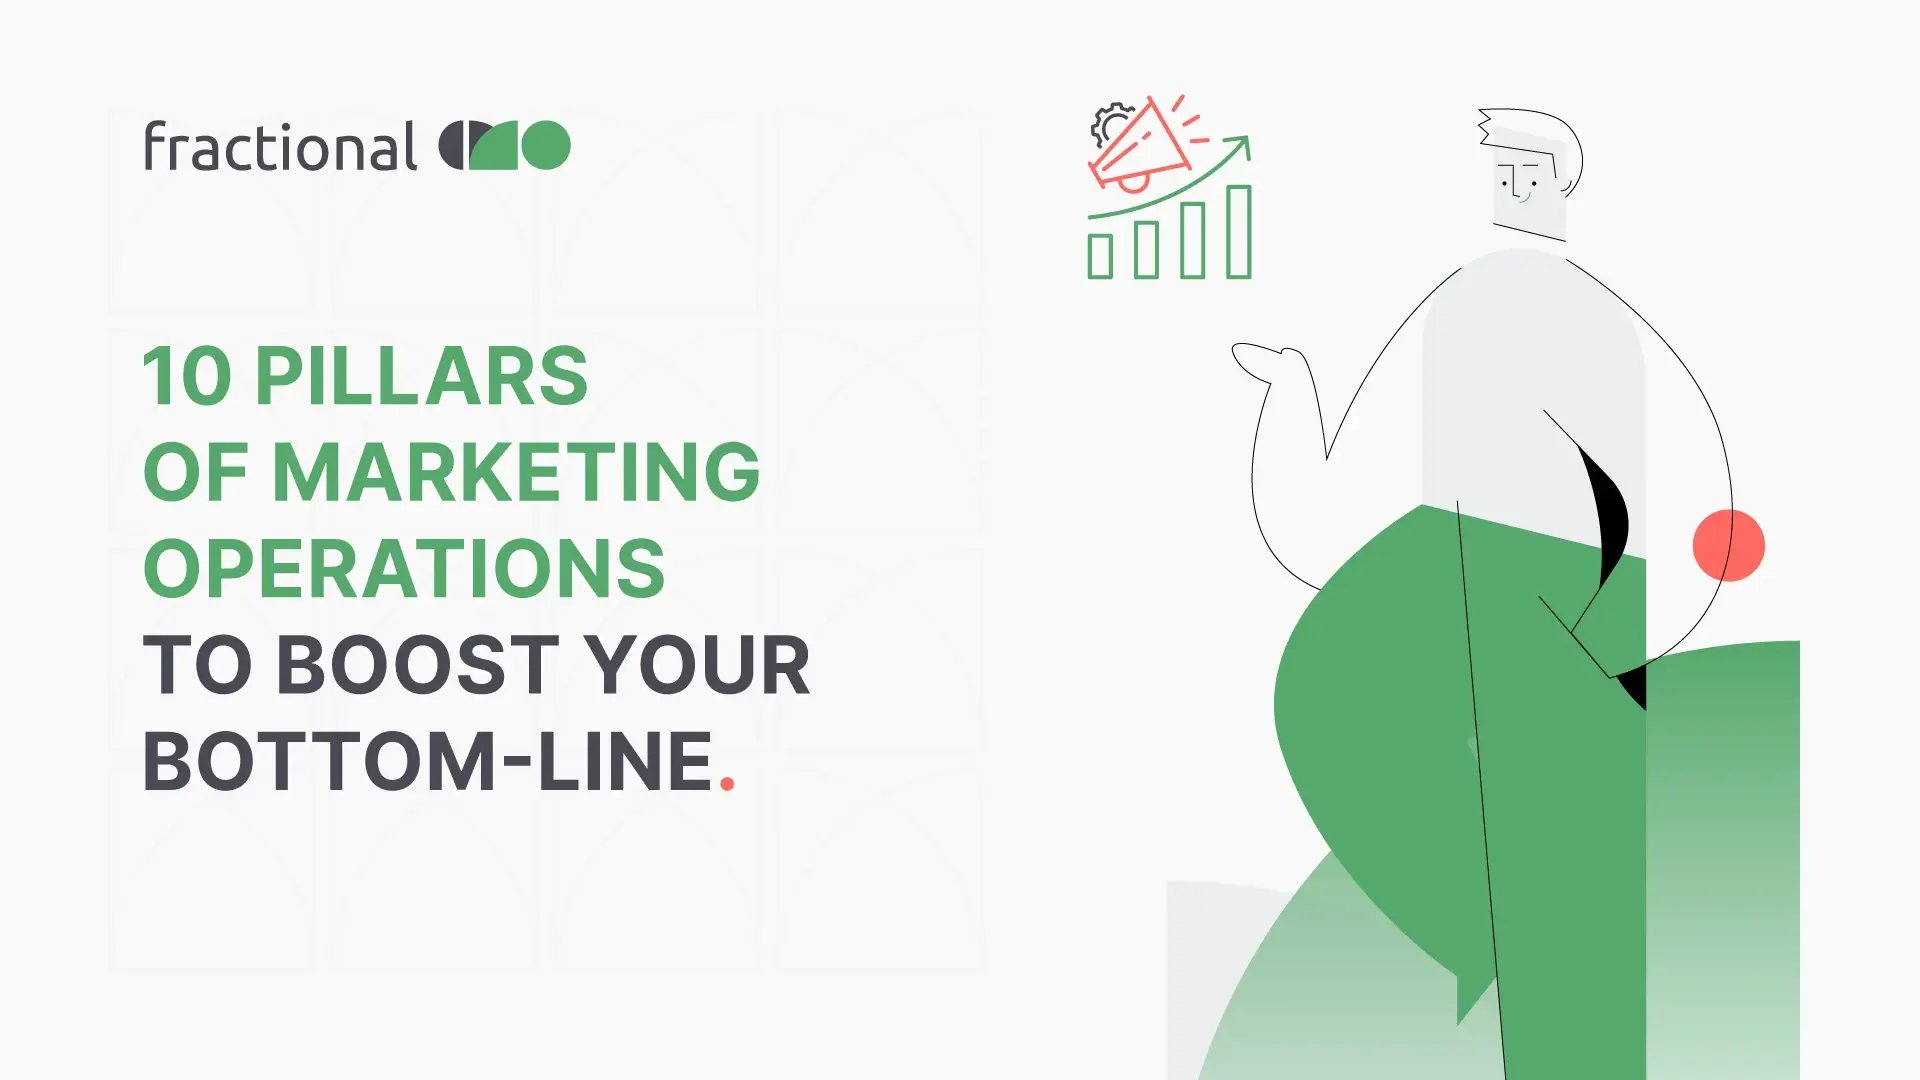 10 pillars of Marketing Operations to boost your bottom-line